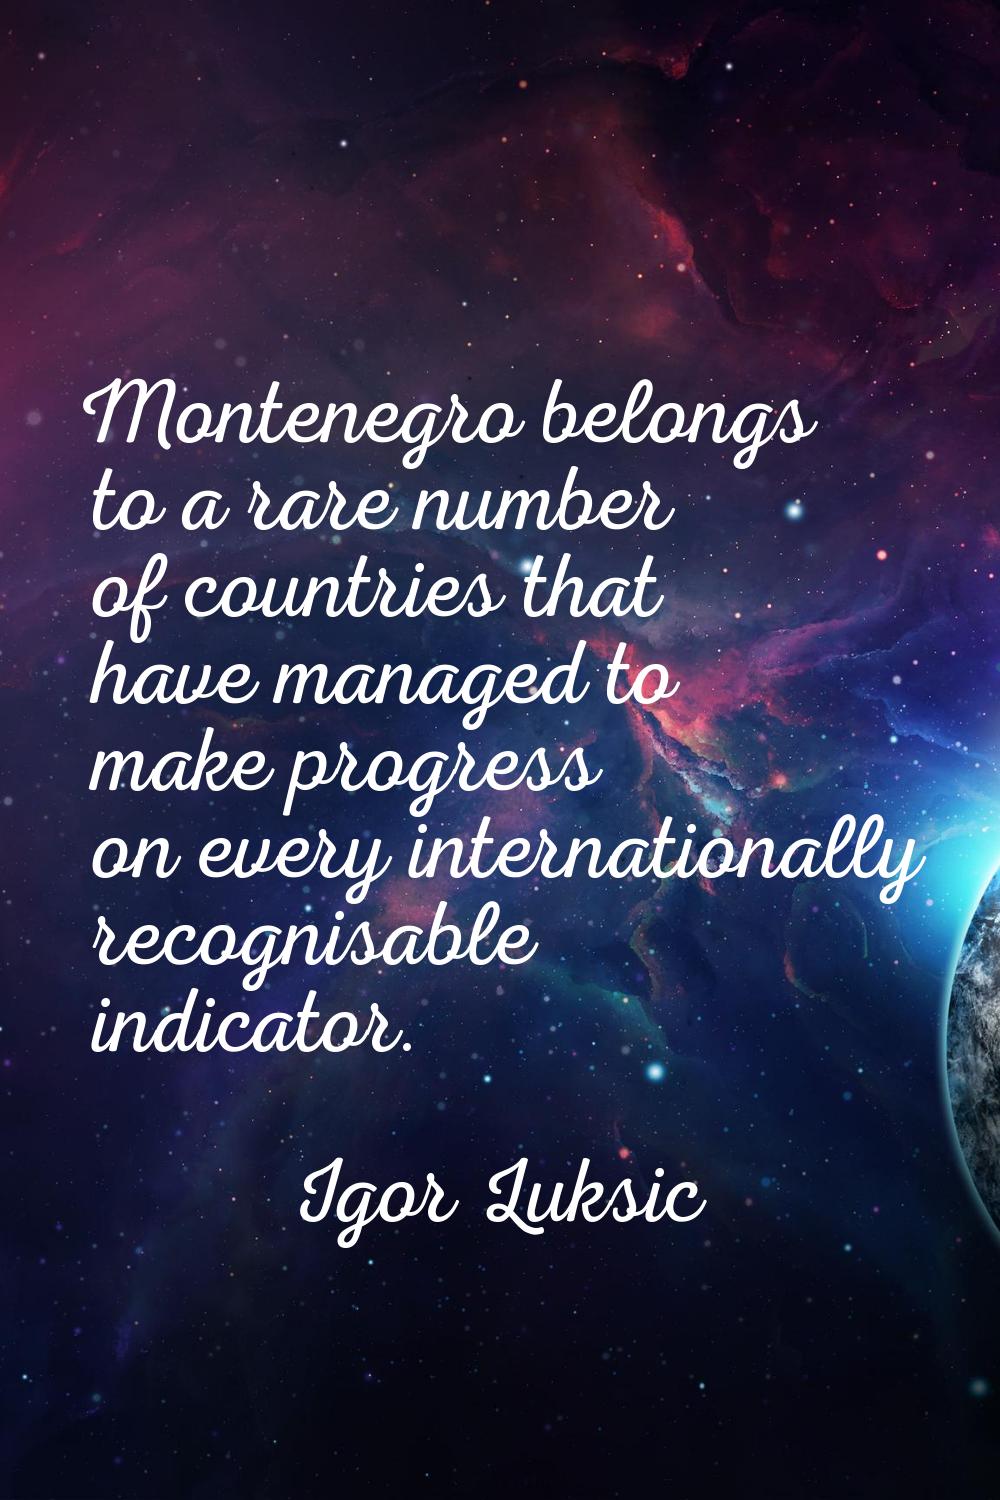 Montenegro belongs to a rare number of countries that have managed to make progress on every intern